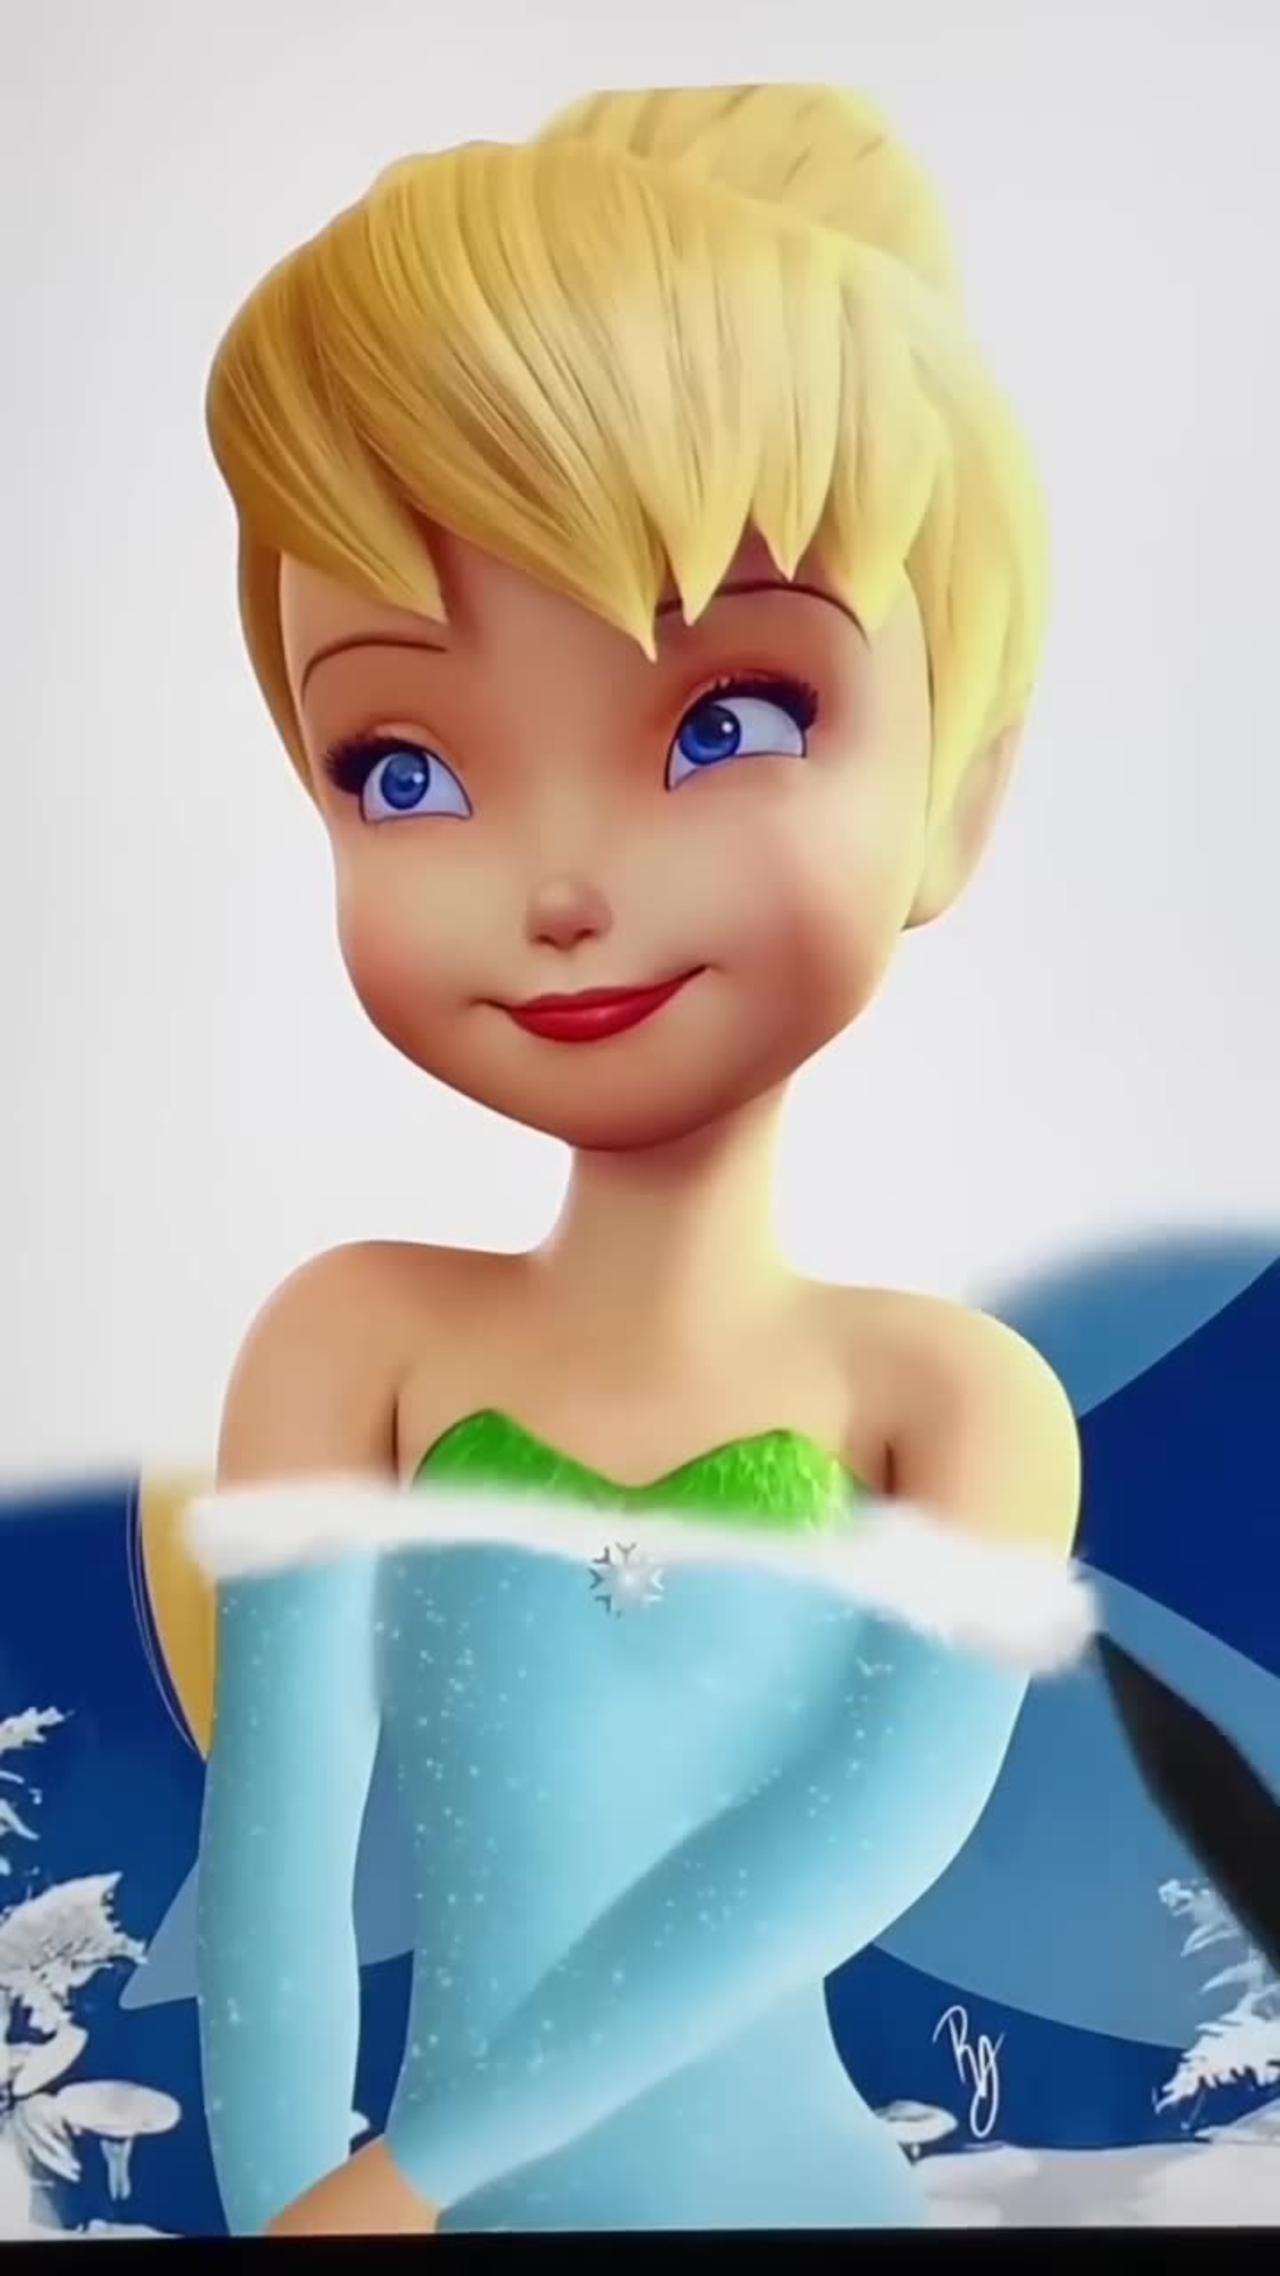 Tinker bell’s transformation